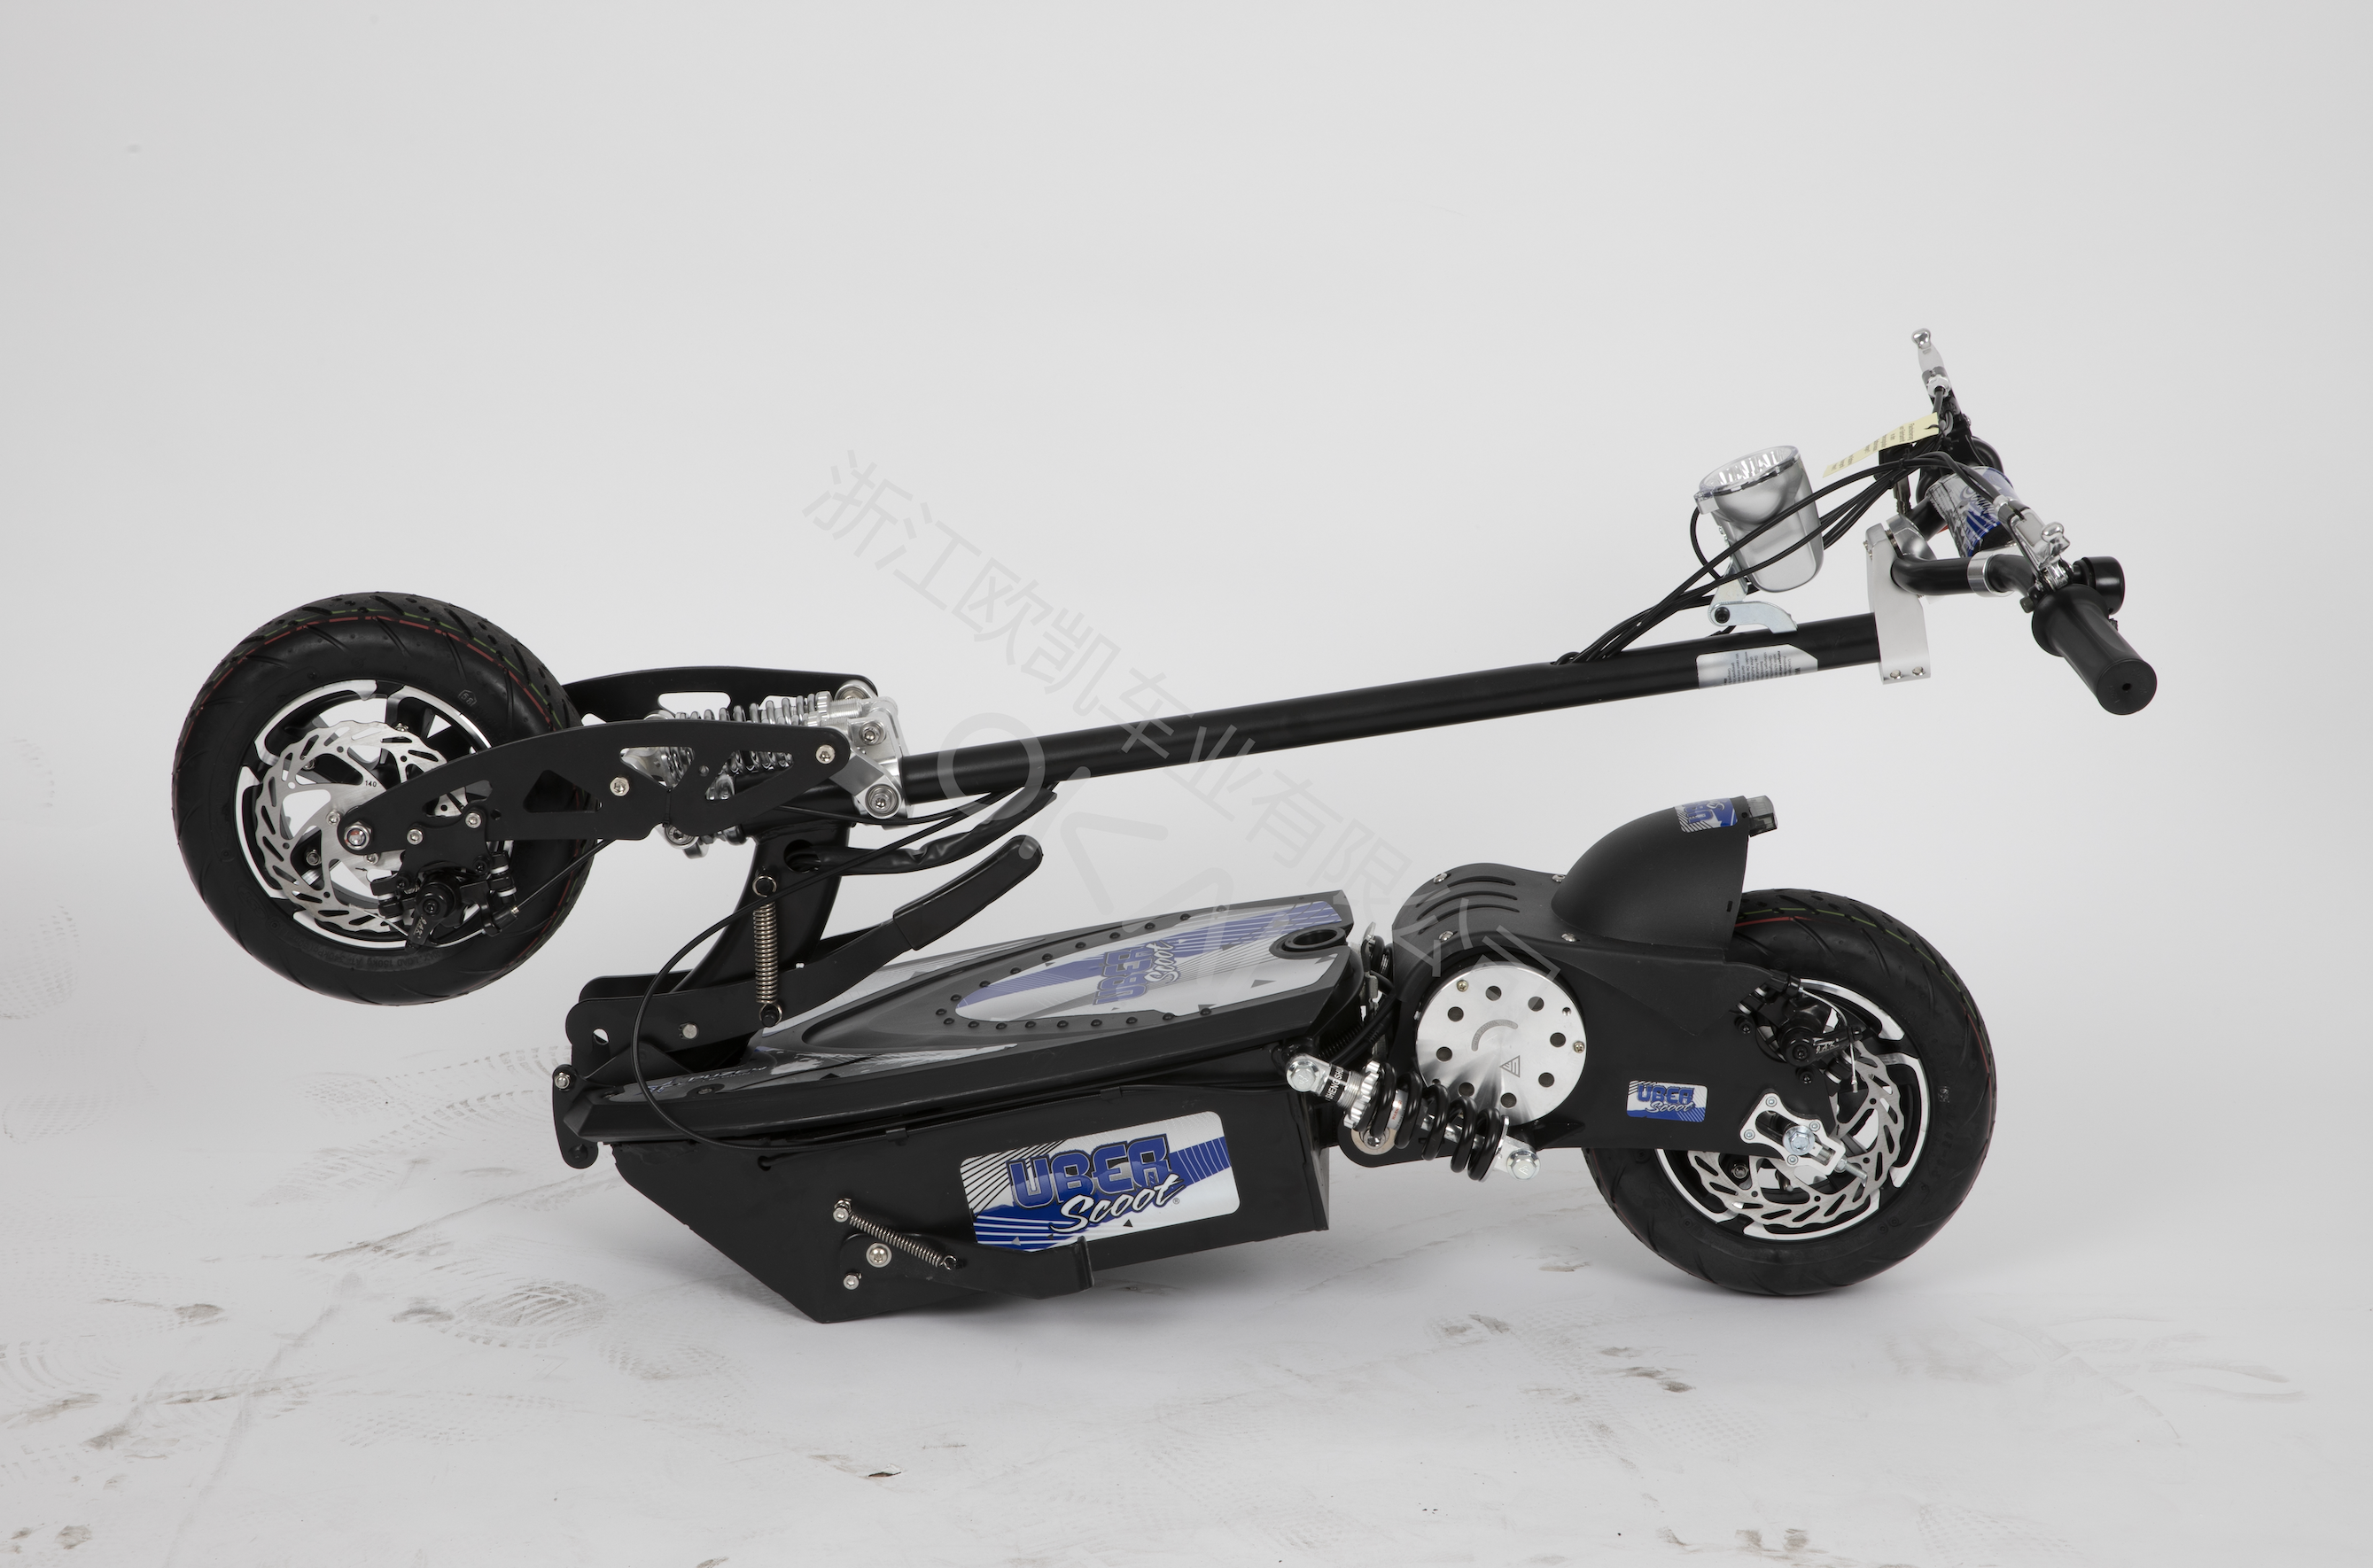 ES17 Electric Scooter